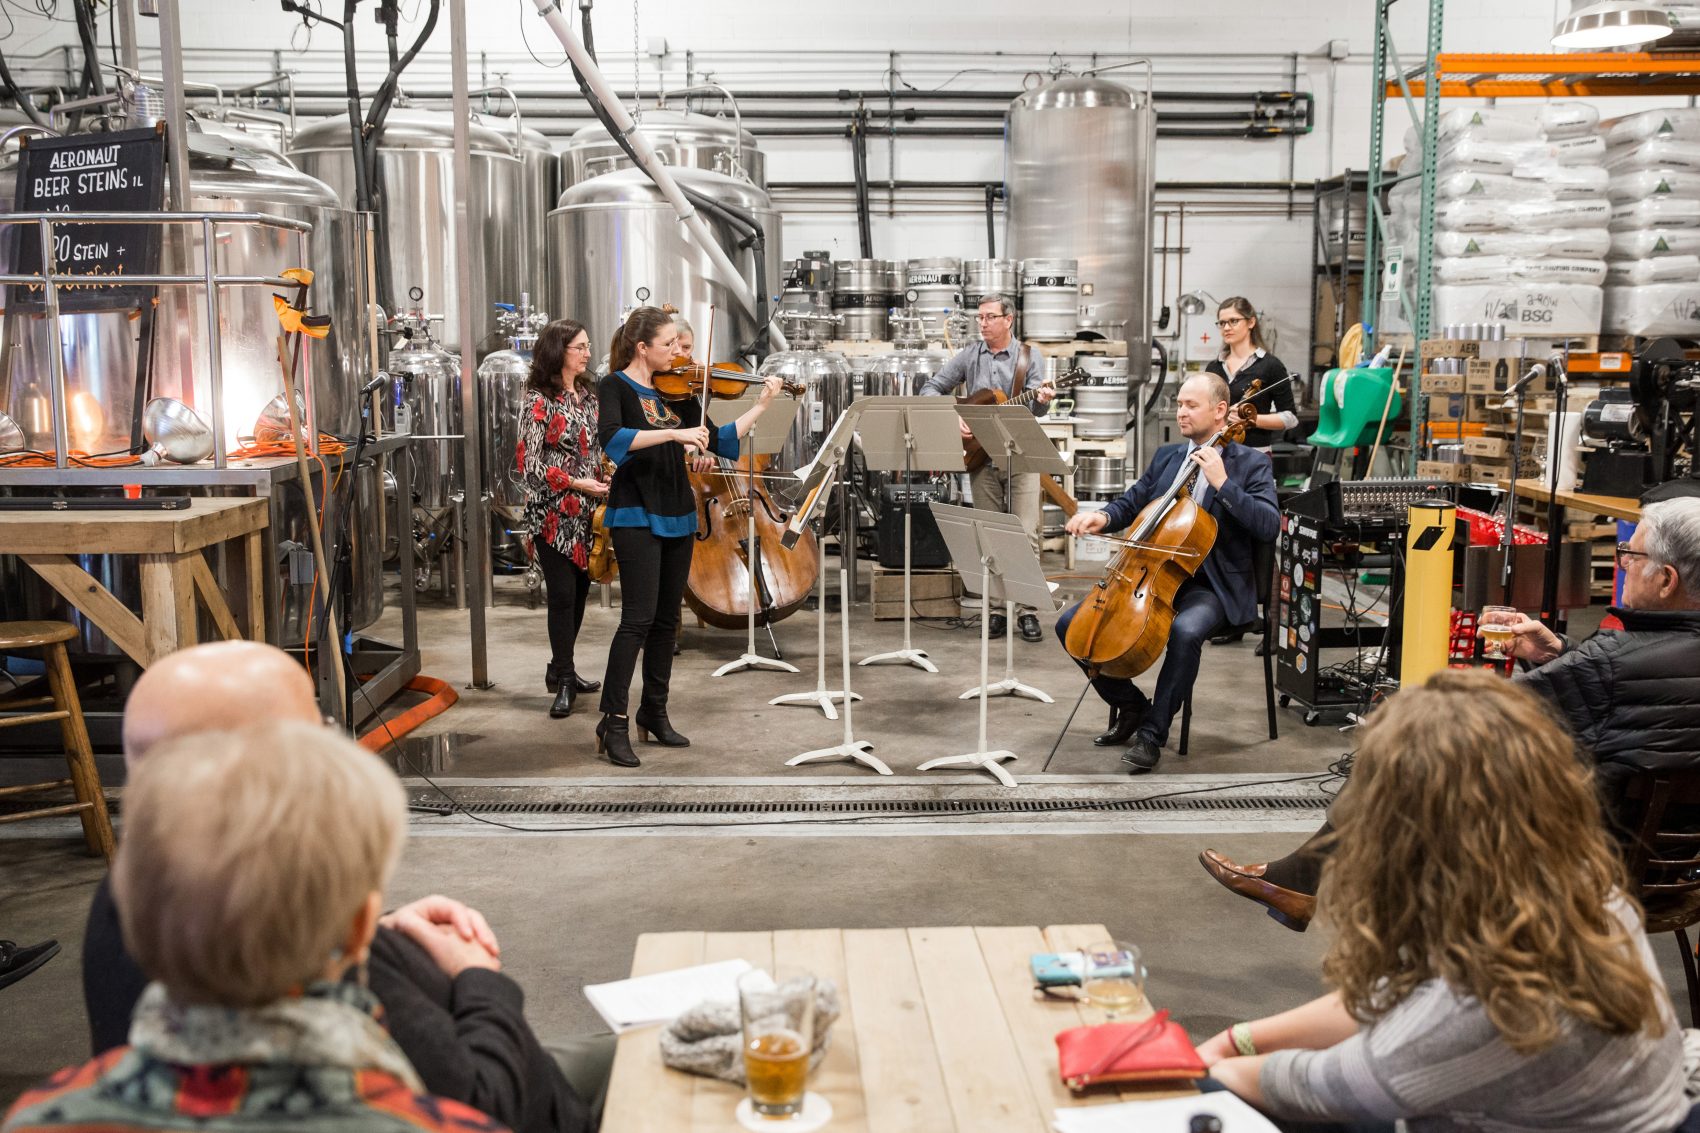 Members of the Boston Symphony Orchestra play at Aeronaut Brewing Company for a community program in 2016. (Courtesy Aram Boghosian/BSO)